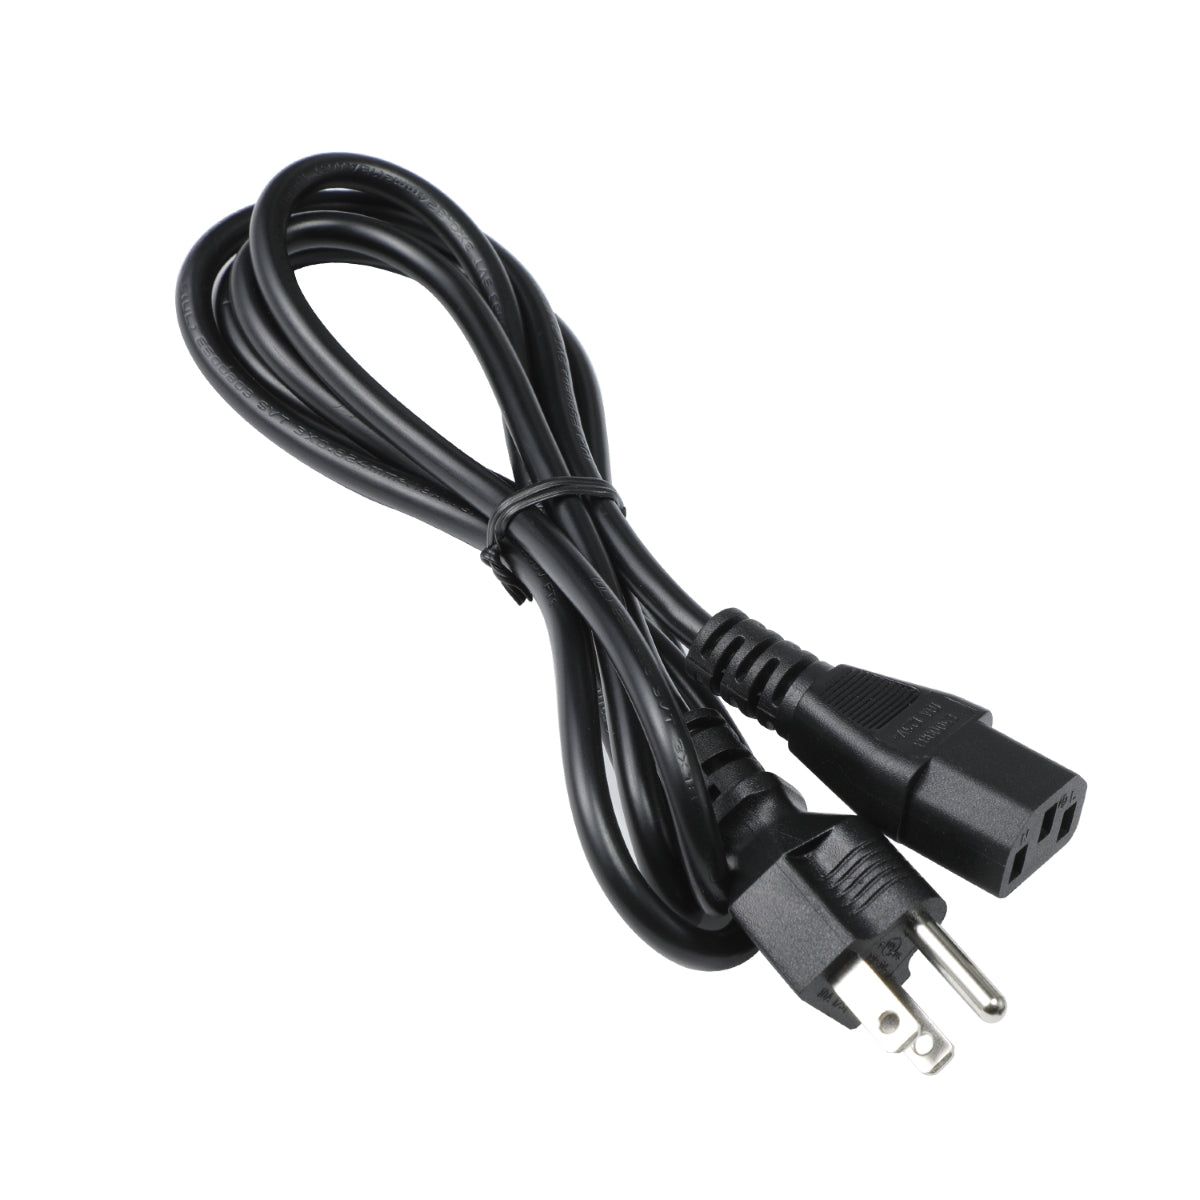 Power Cord for BenQ PD2500Q IPS Monitor